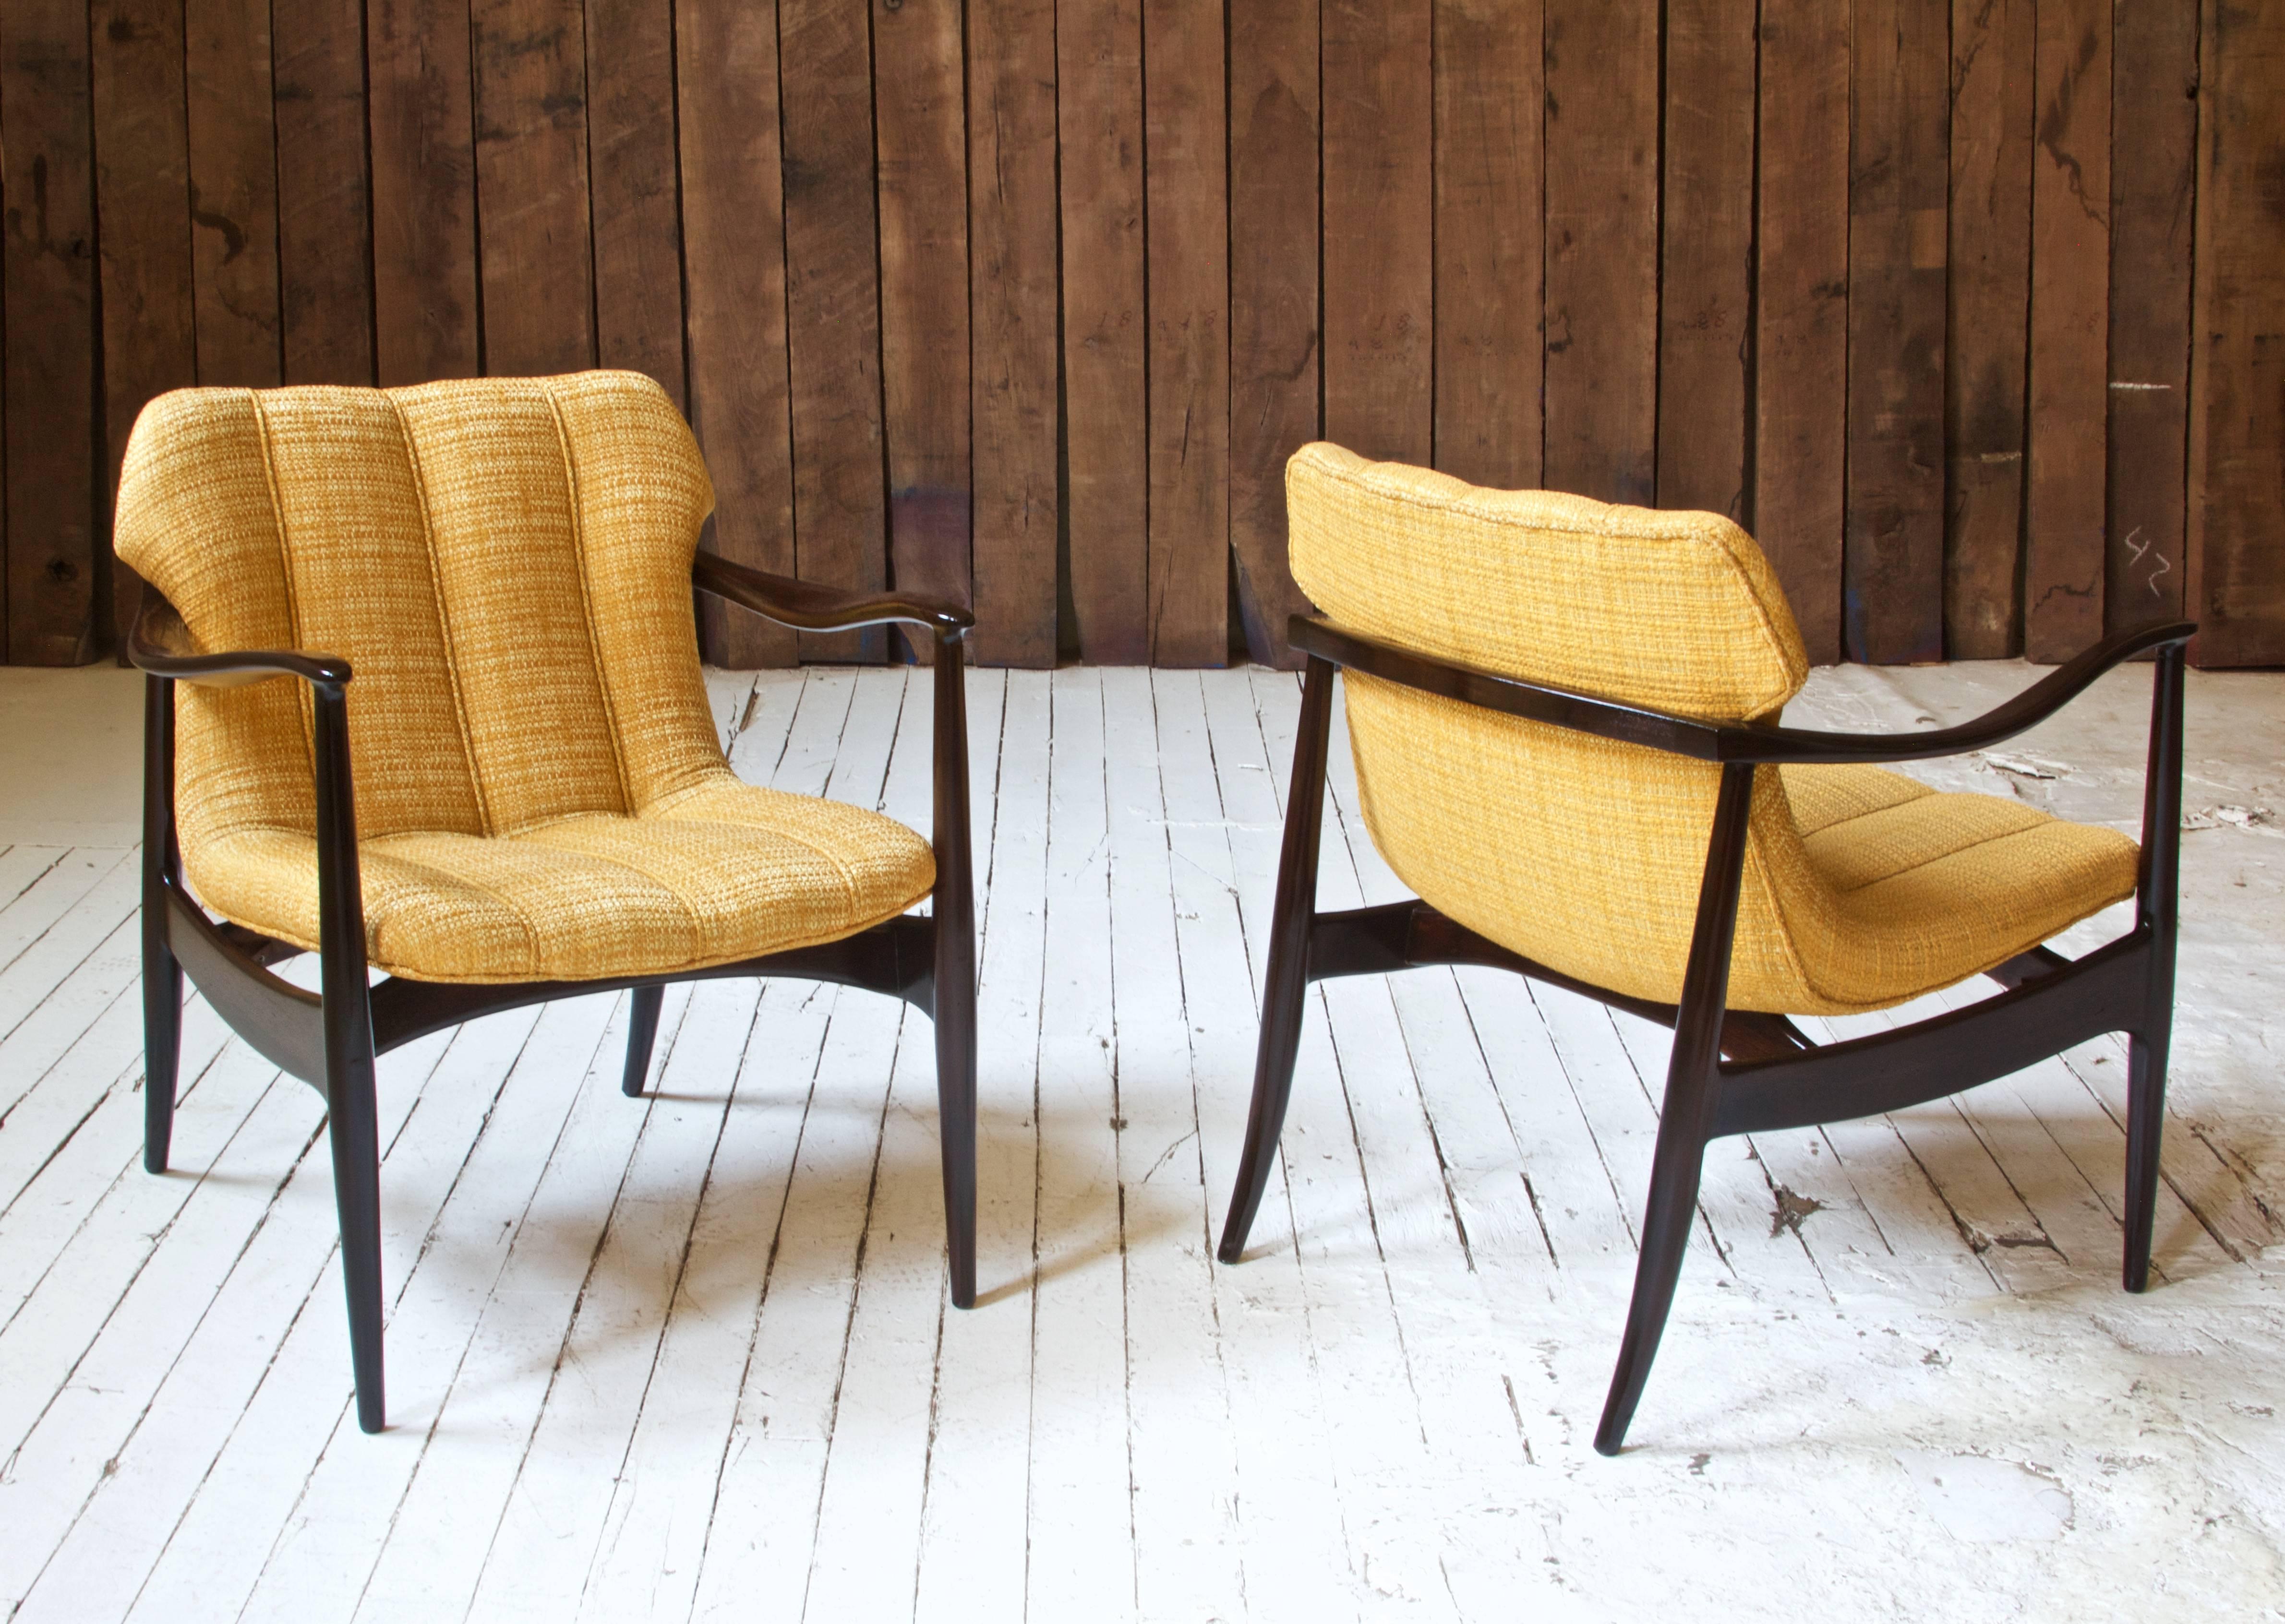 American Vintage Pair of Walnut Armchairs by Bertha Schaefer for Singer & Sons, 1960s